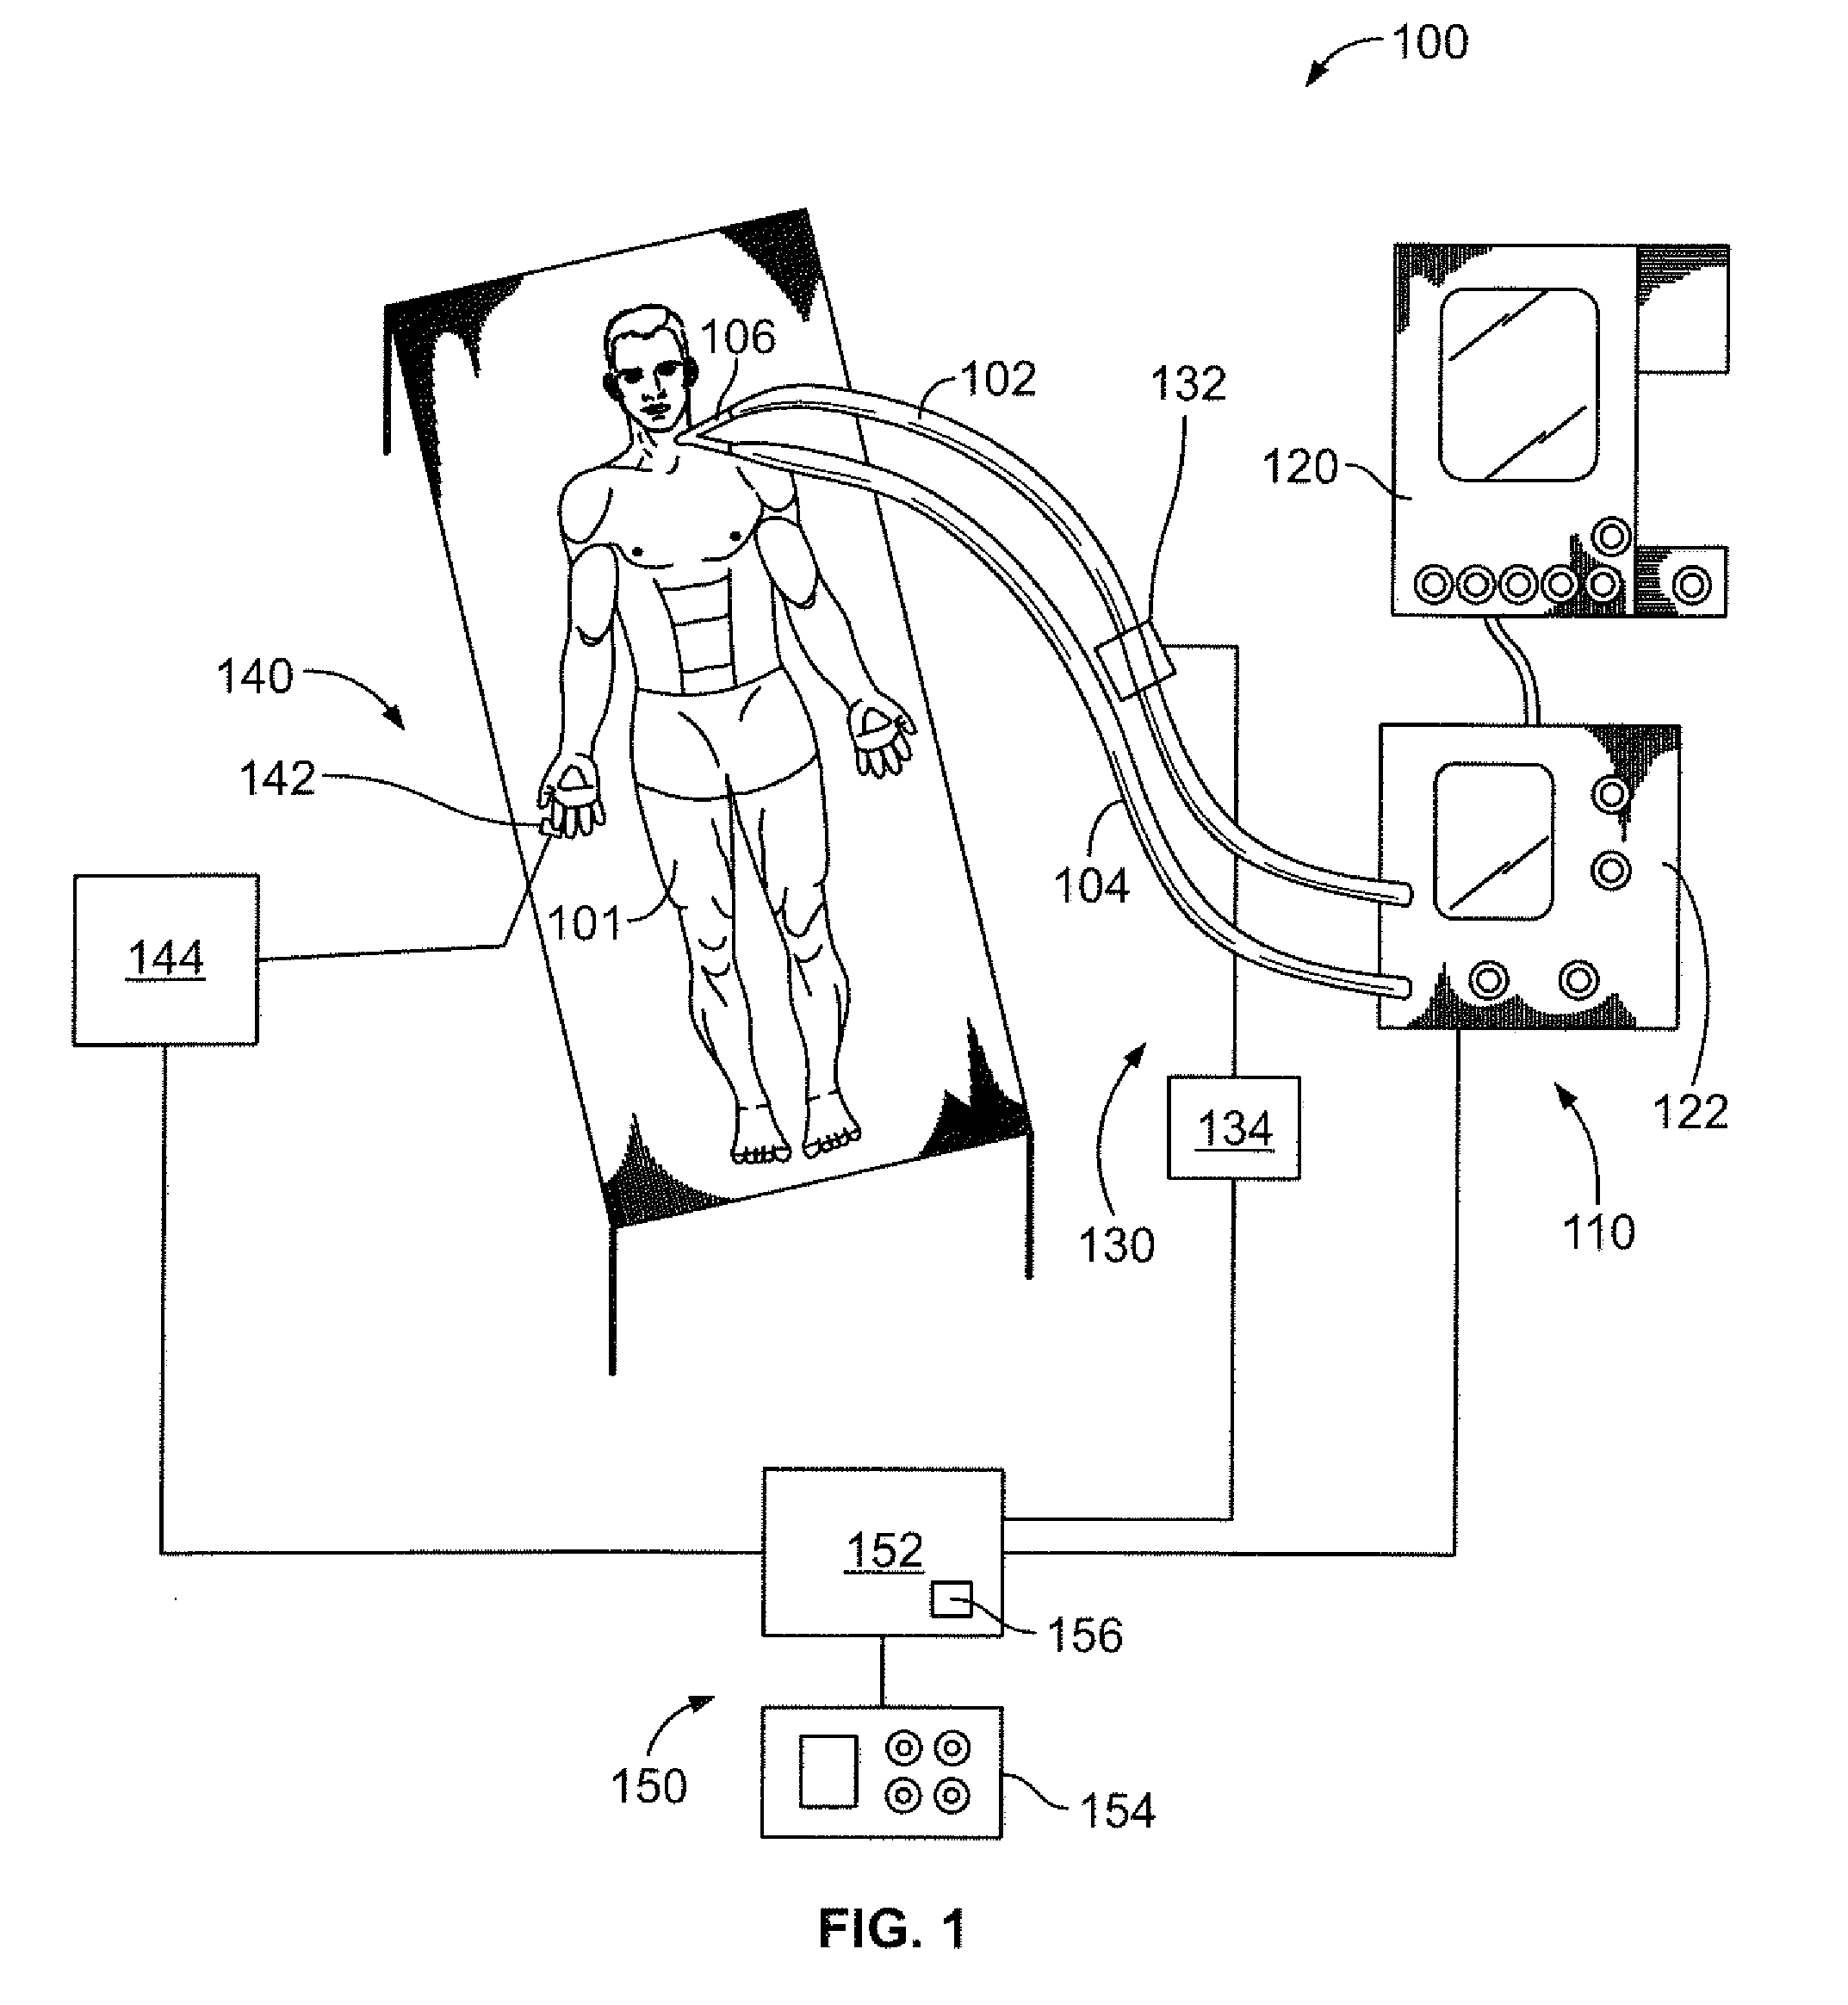 Systems and methods for determining fluid responsiveness